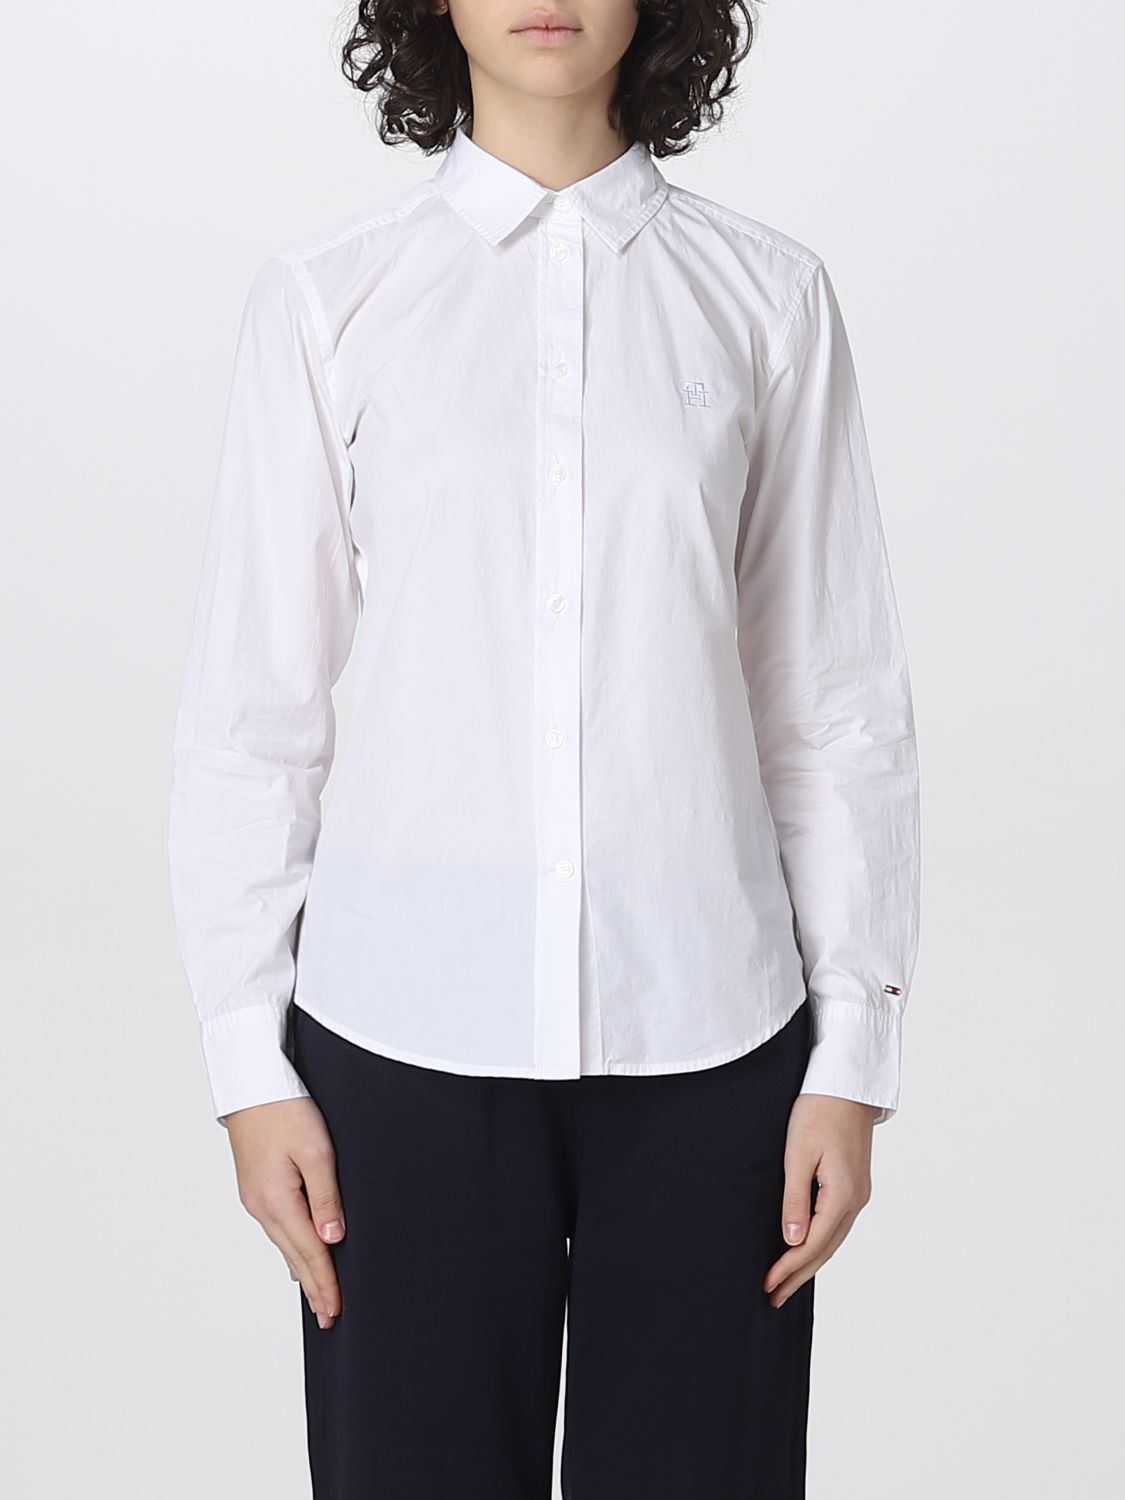 TOMMY HILFIGER: shirt for woman - White | Tommy Hilfiger shirt ...